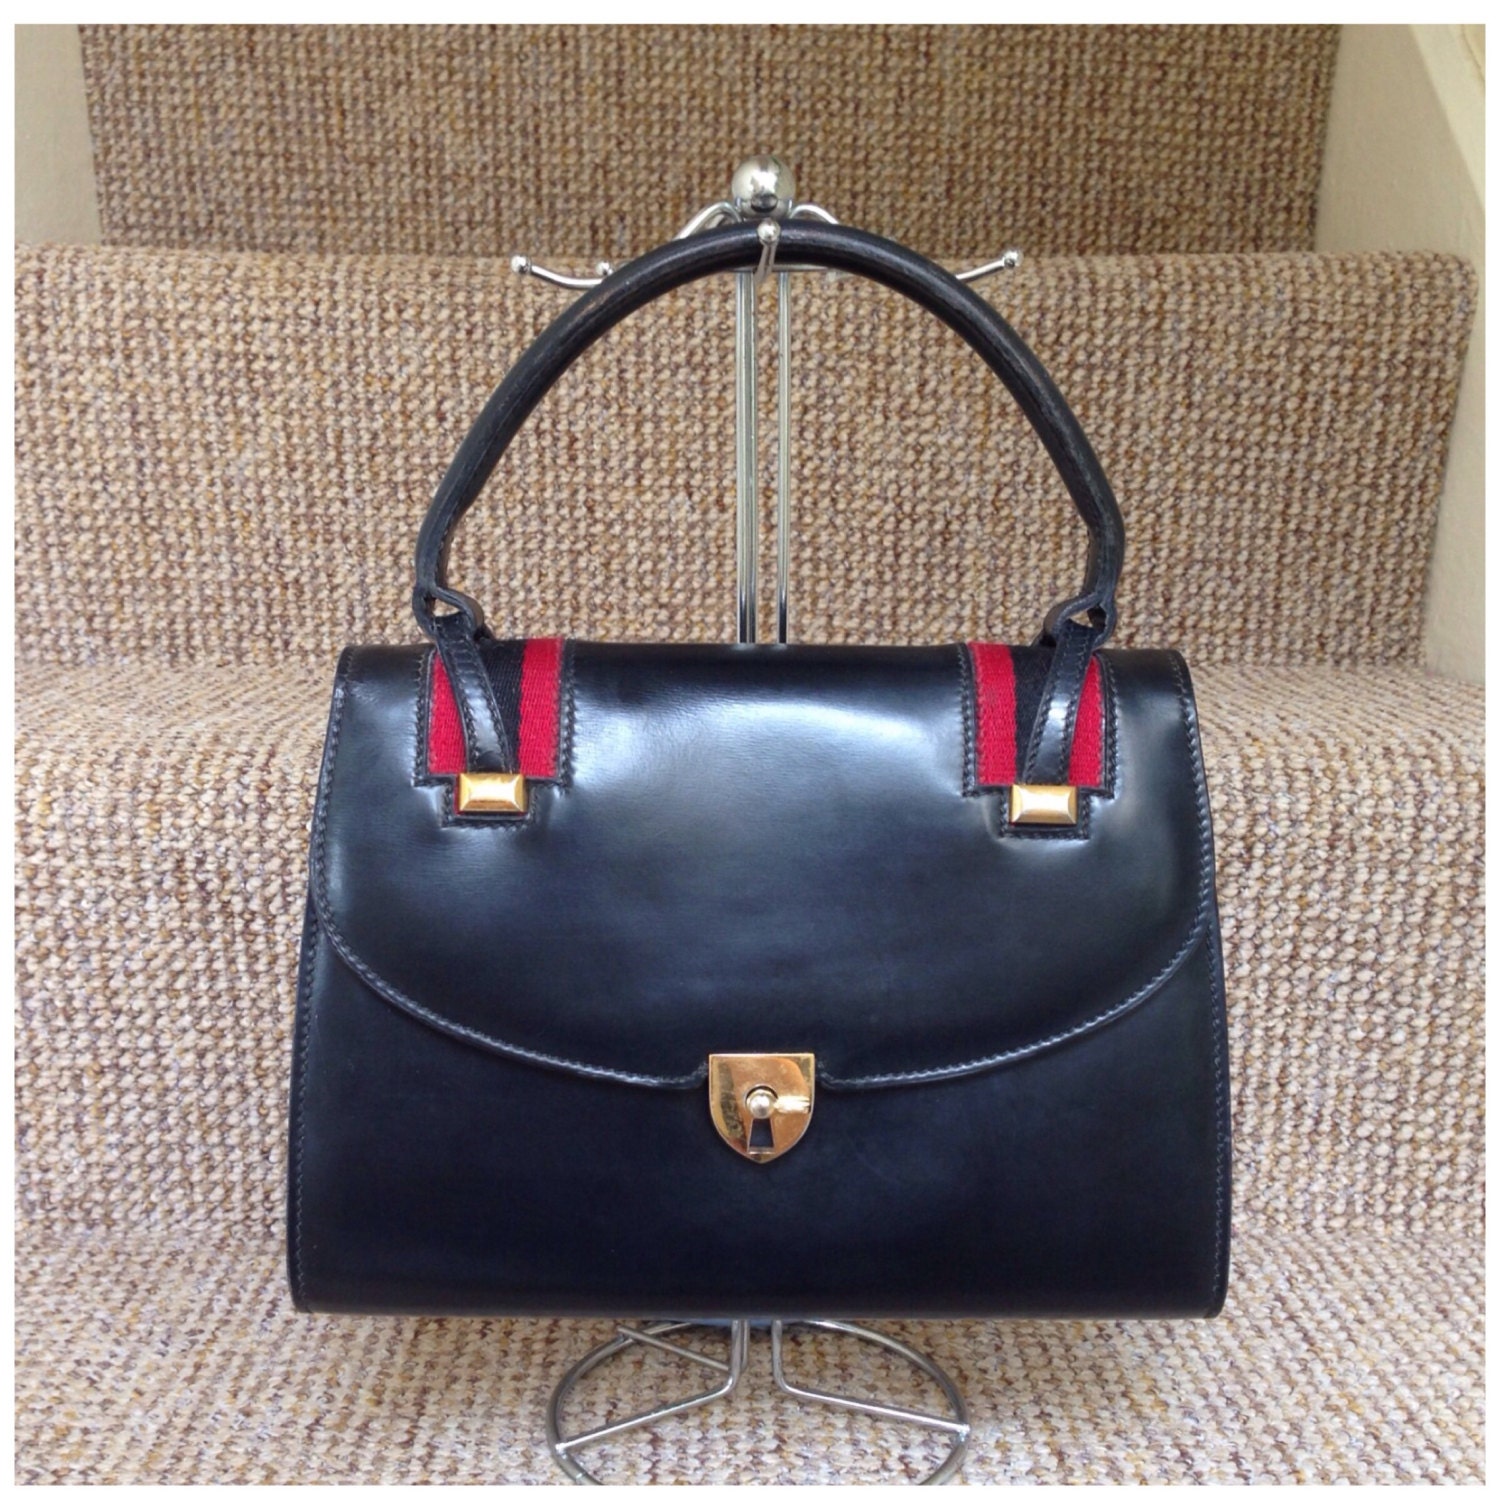 Sale Authentic Gucci black leather handbag made by KingdomOfBags